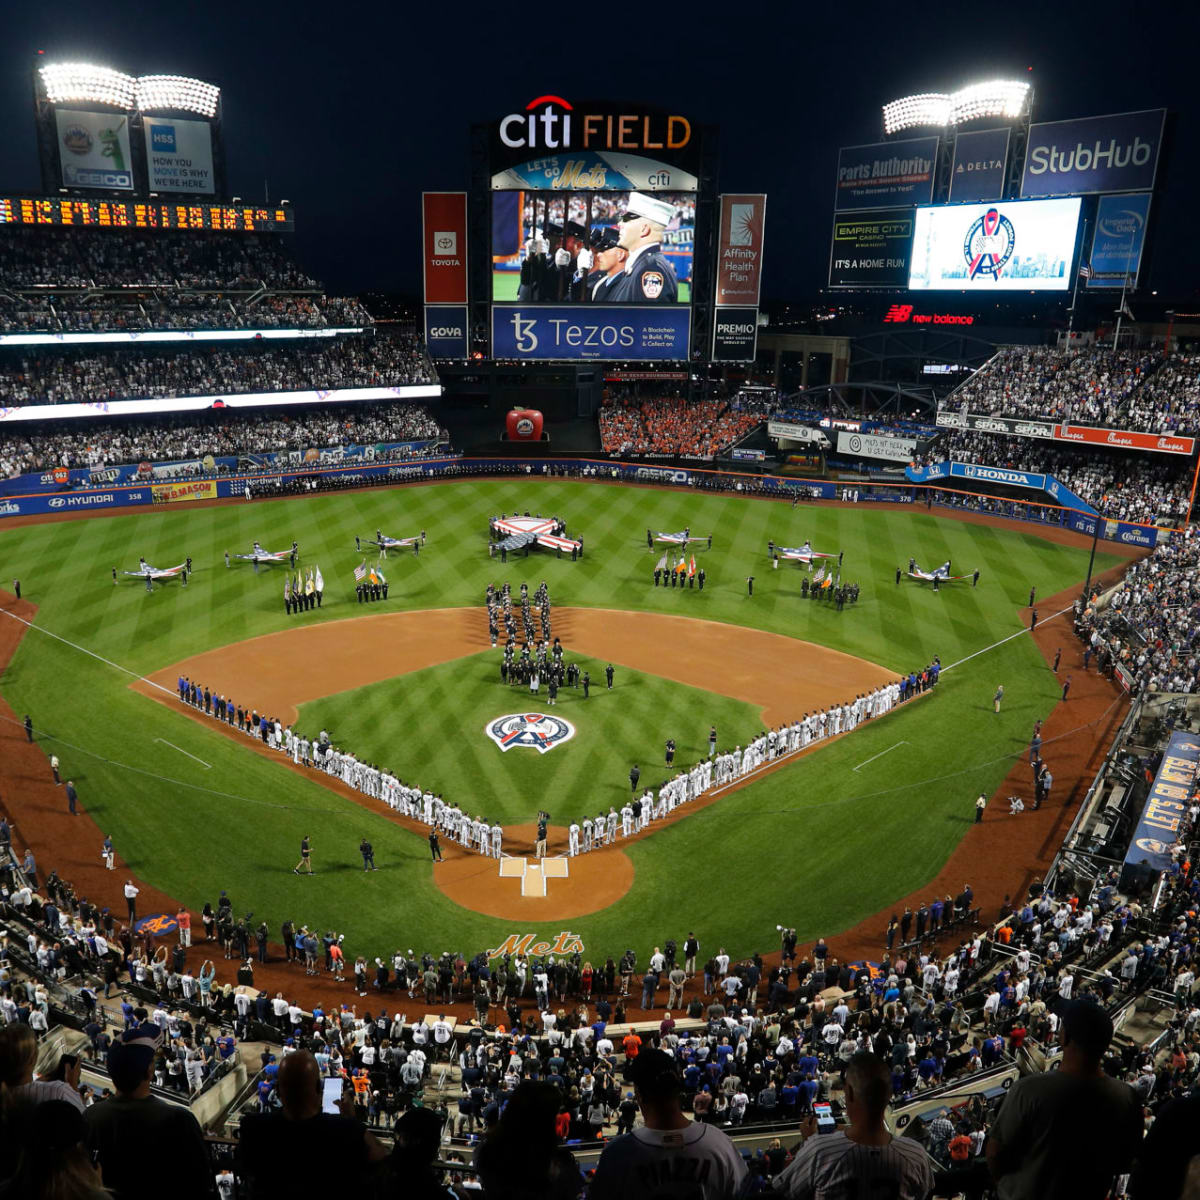 NEW YORK, NY - Wearing New York Mets jerseys, service members from the Air  Force, Army, Marines and Navy play a tournament style softball game at  Citifield on June 11, 2015. The